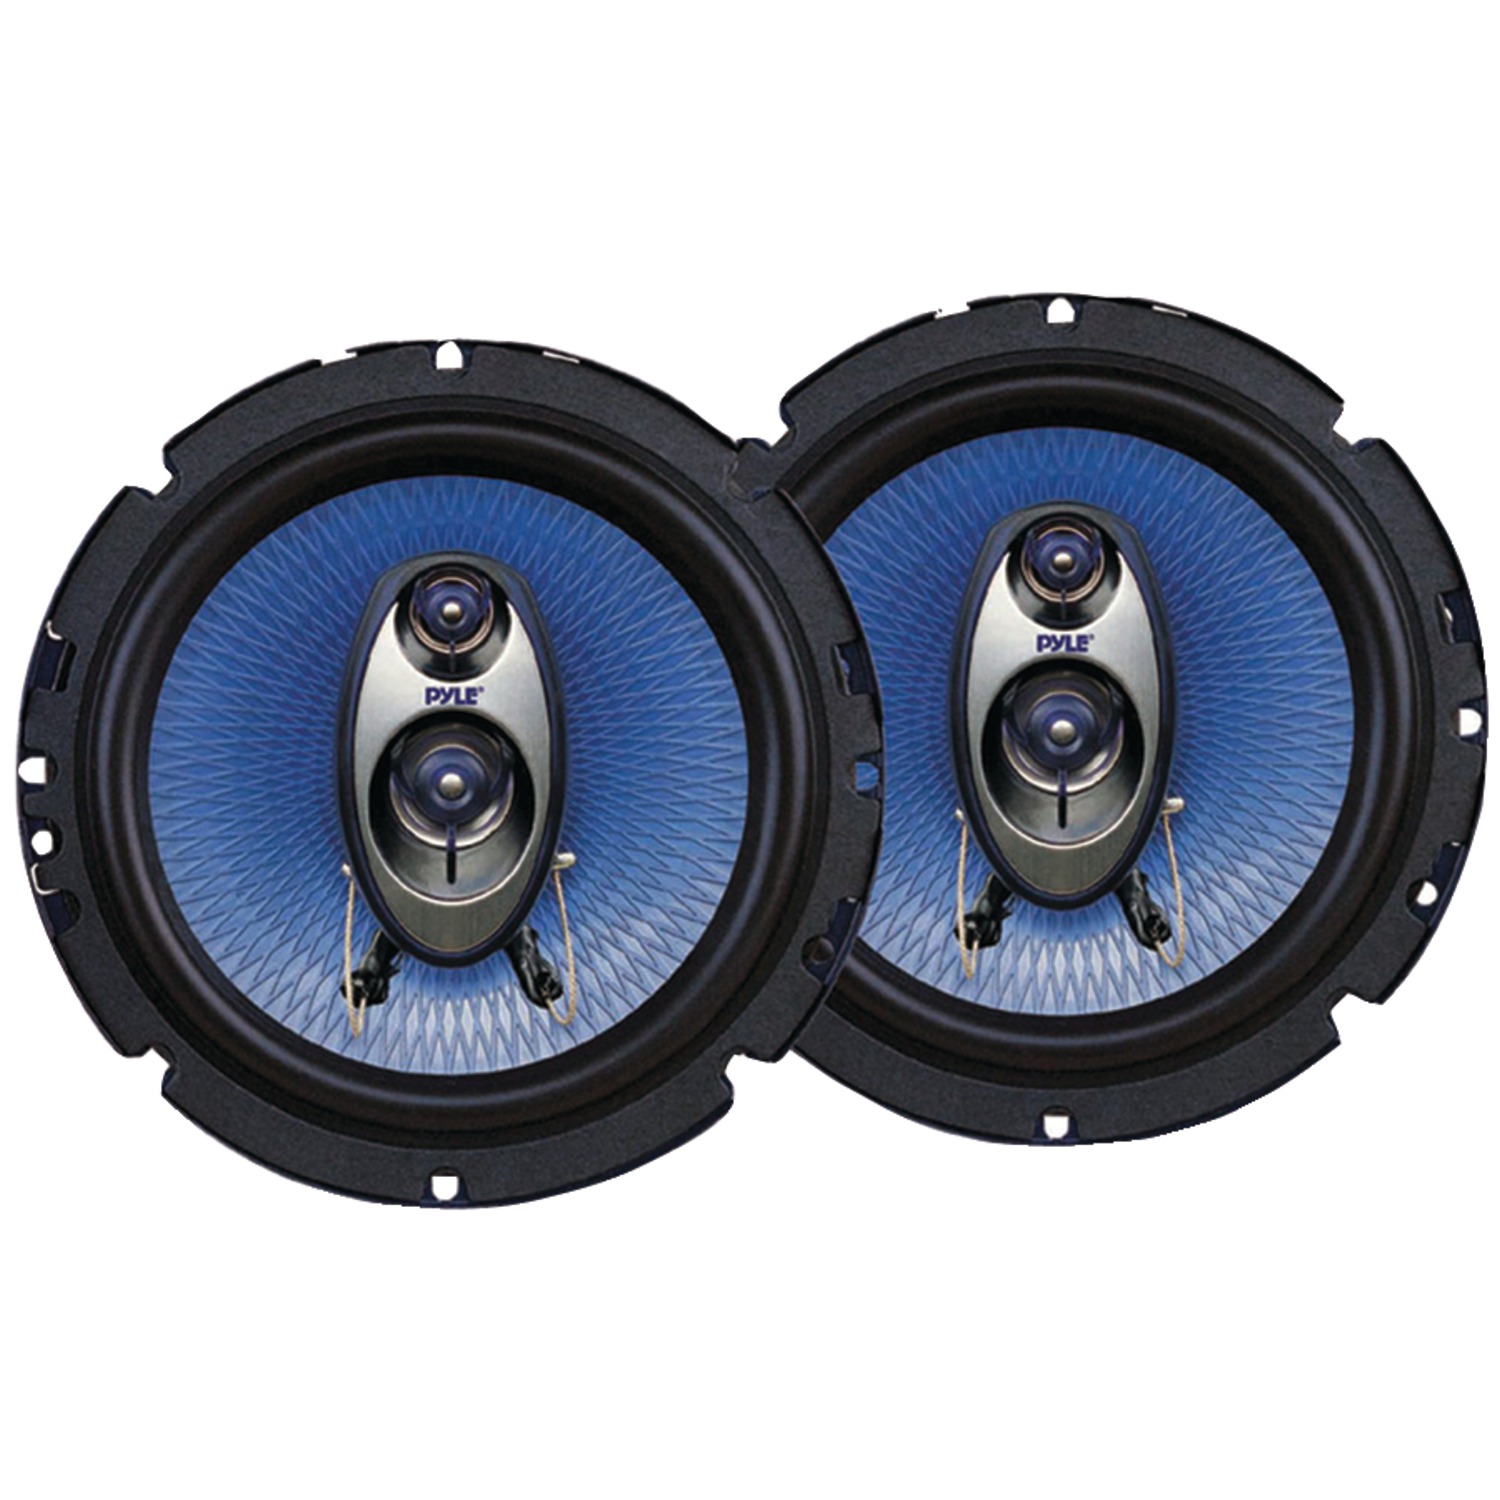 Pyle PL63BL 6.5" 360 Watts 3-Way Car Audio Coaxial Speakers PAIR Blue - image 1 of 7